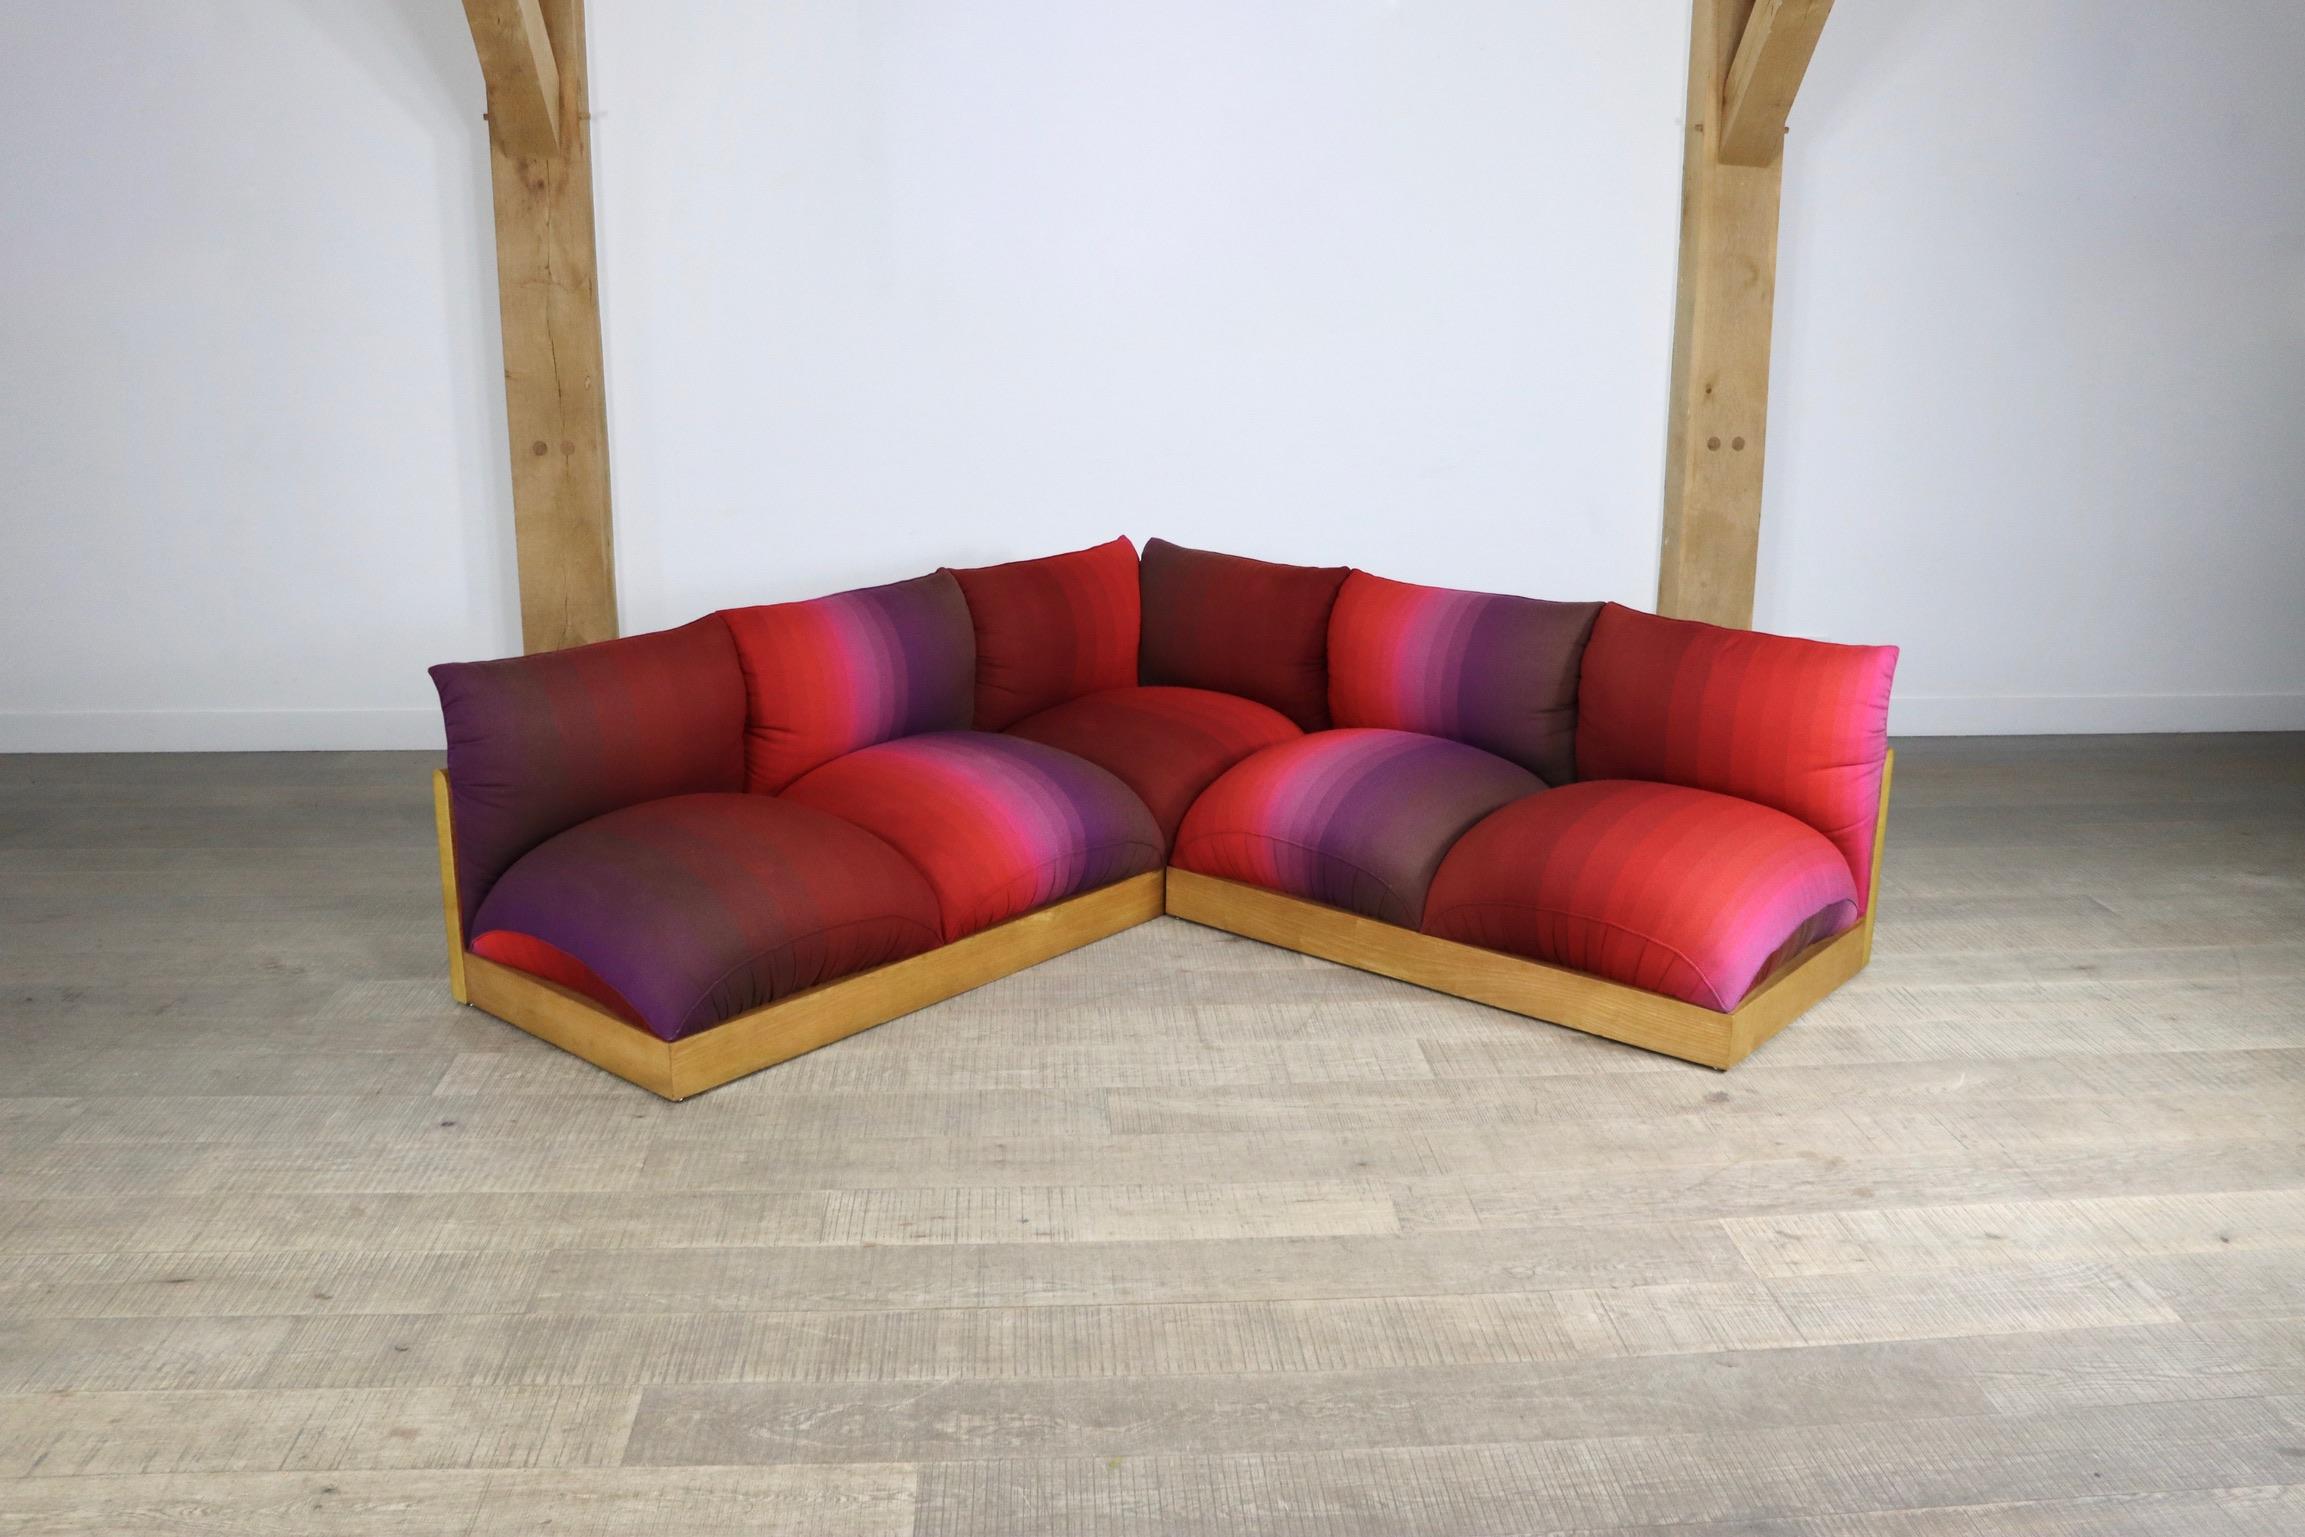 Unique sectional sofa model 'Down' by Carlo Bartoli for Rossi di Albizzate in a bold original upholstery in a spectrum of red to purple colours. This ultimate seventies sofa is made of an oak wooden base with large cushions hooked into it. The large